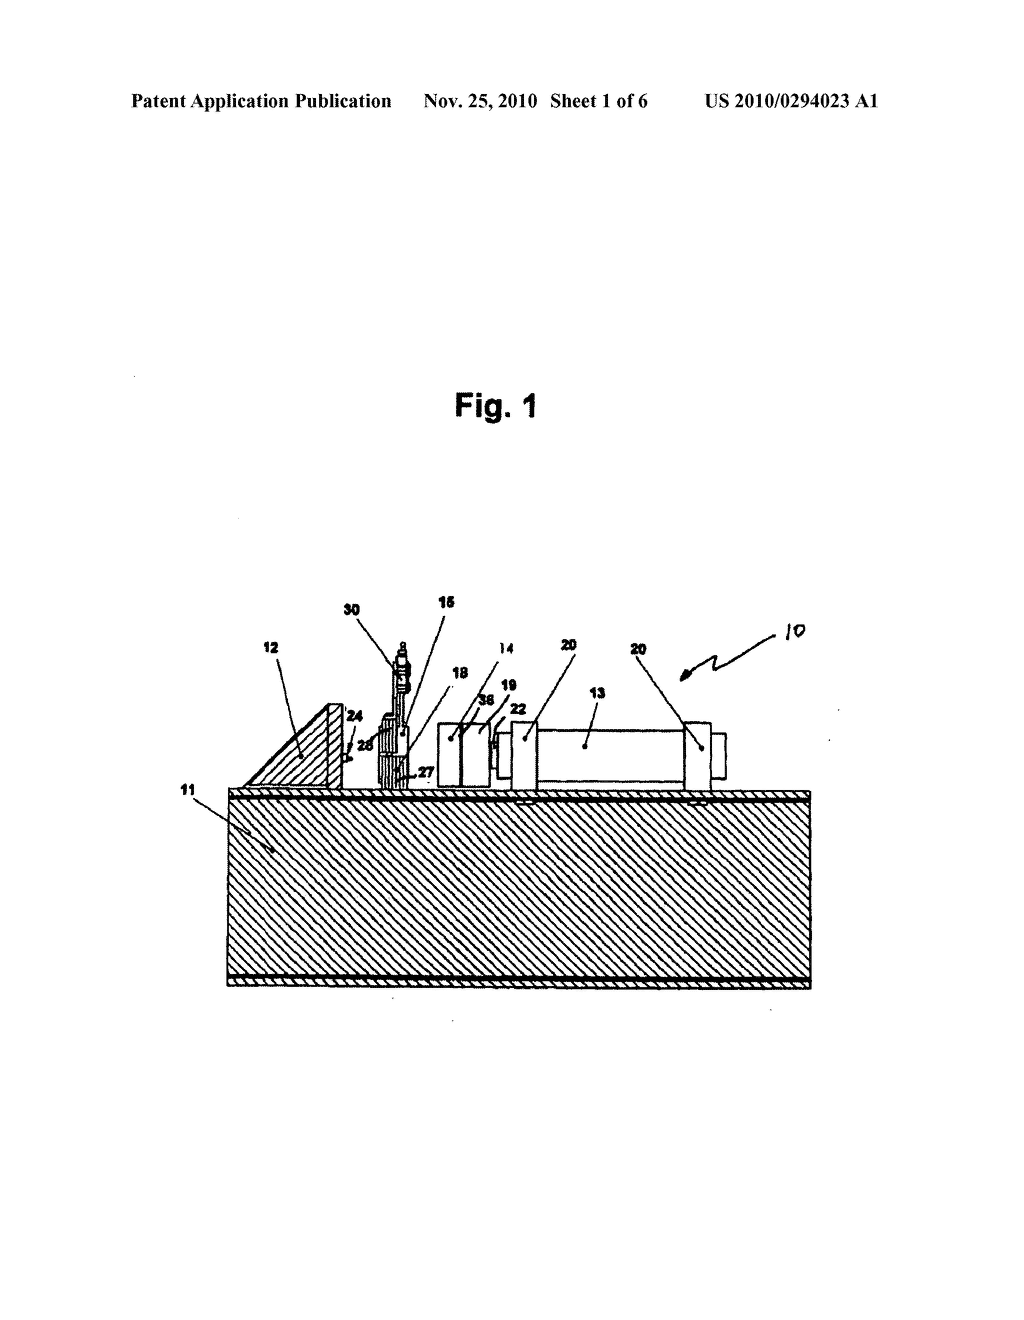 Propellant Ignition Testing Apparatus Having a Compressively Sealable Chamber - diagram, schematic, and image 02